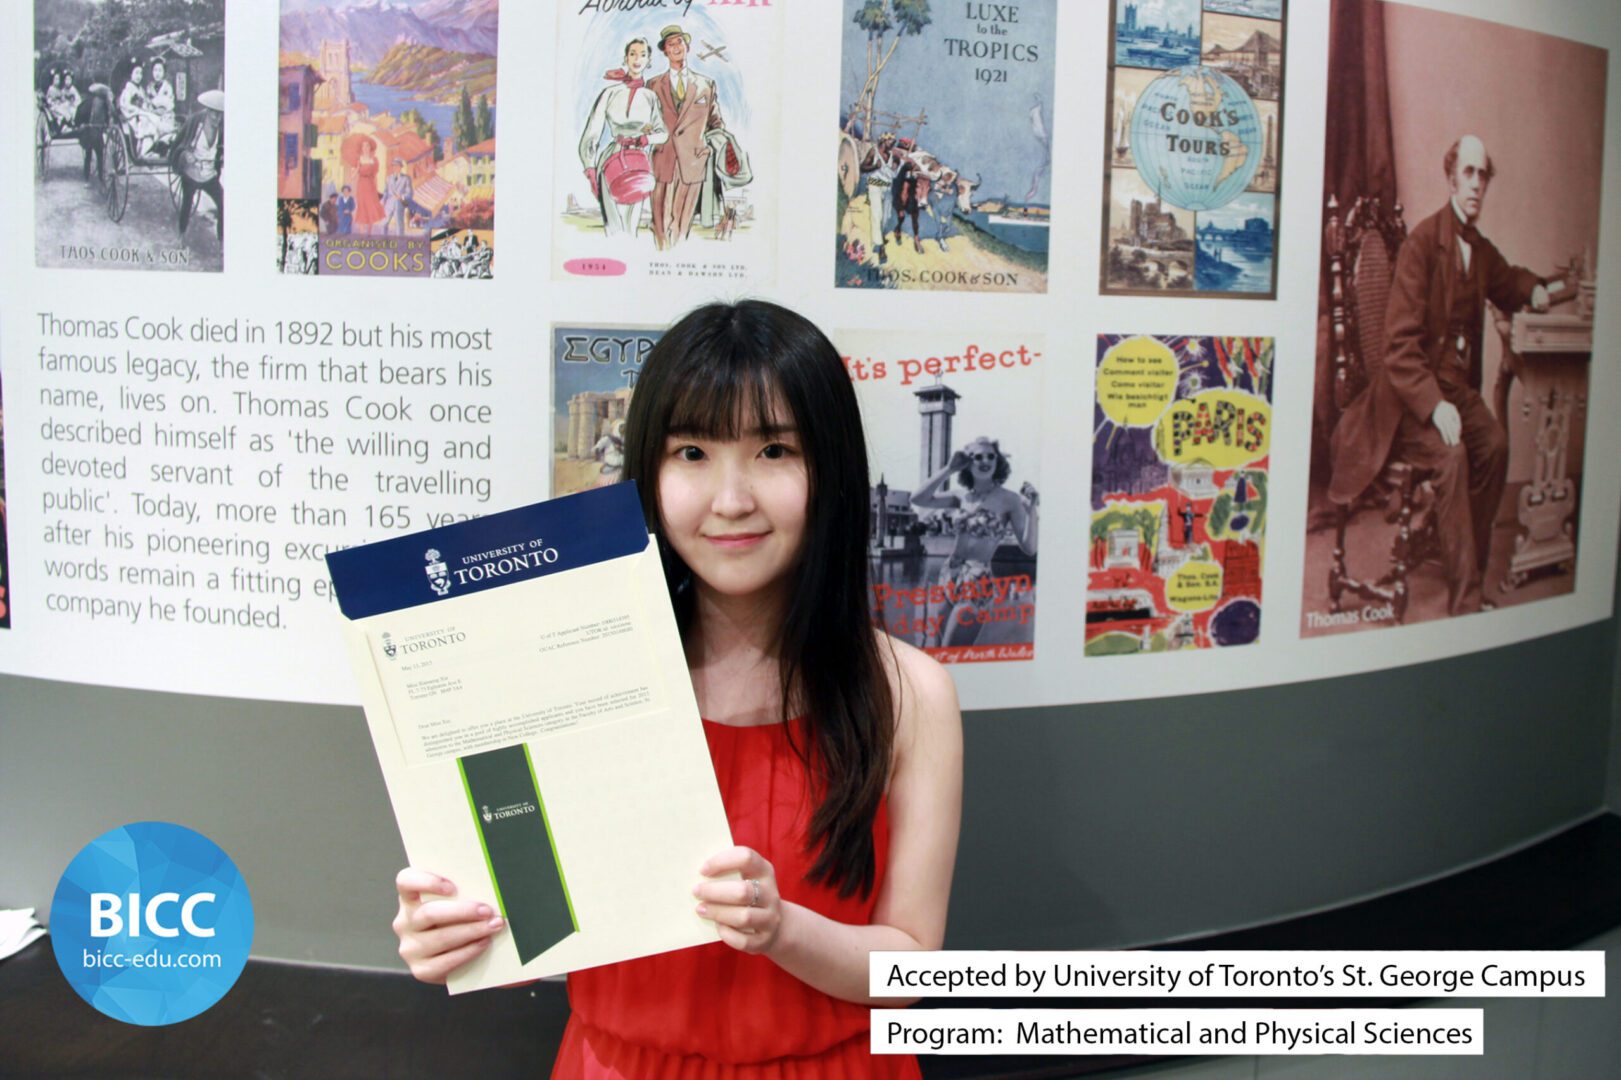 A girl student showing her Toronto University Certificate